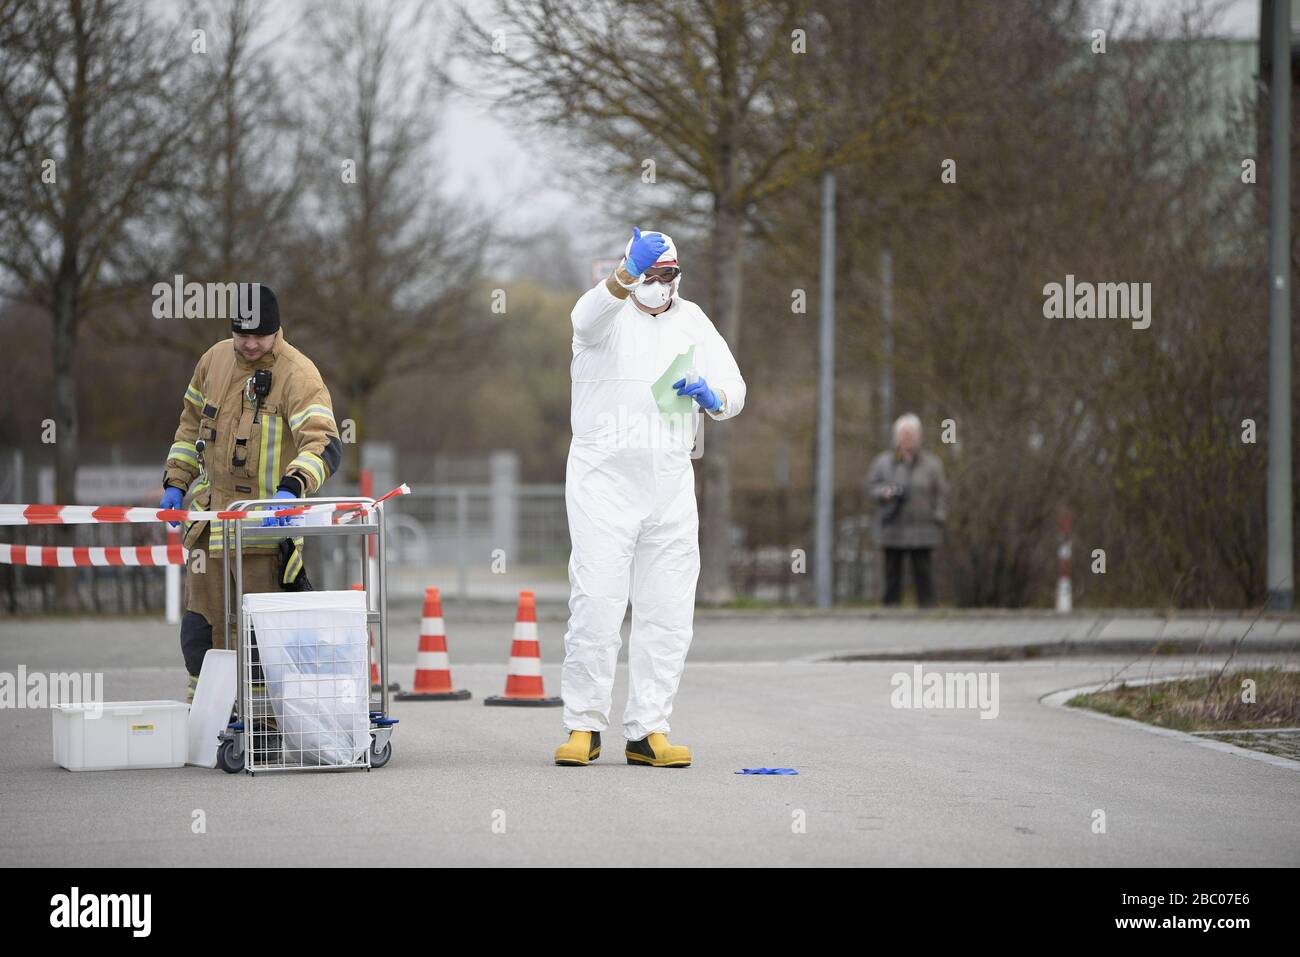 The Munich District Office and the Municipality of Ismaning have set up a drive-in test for the corona virus (COVID-19) for persons with justified suspicion. [automated translation] Stock Photo